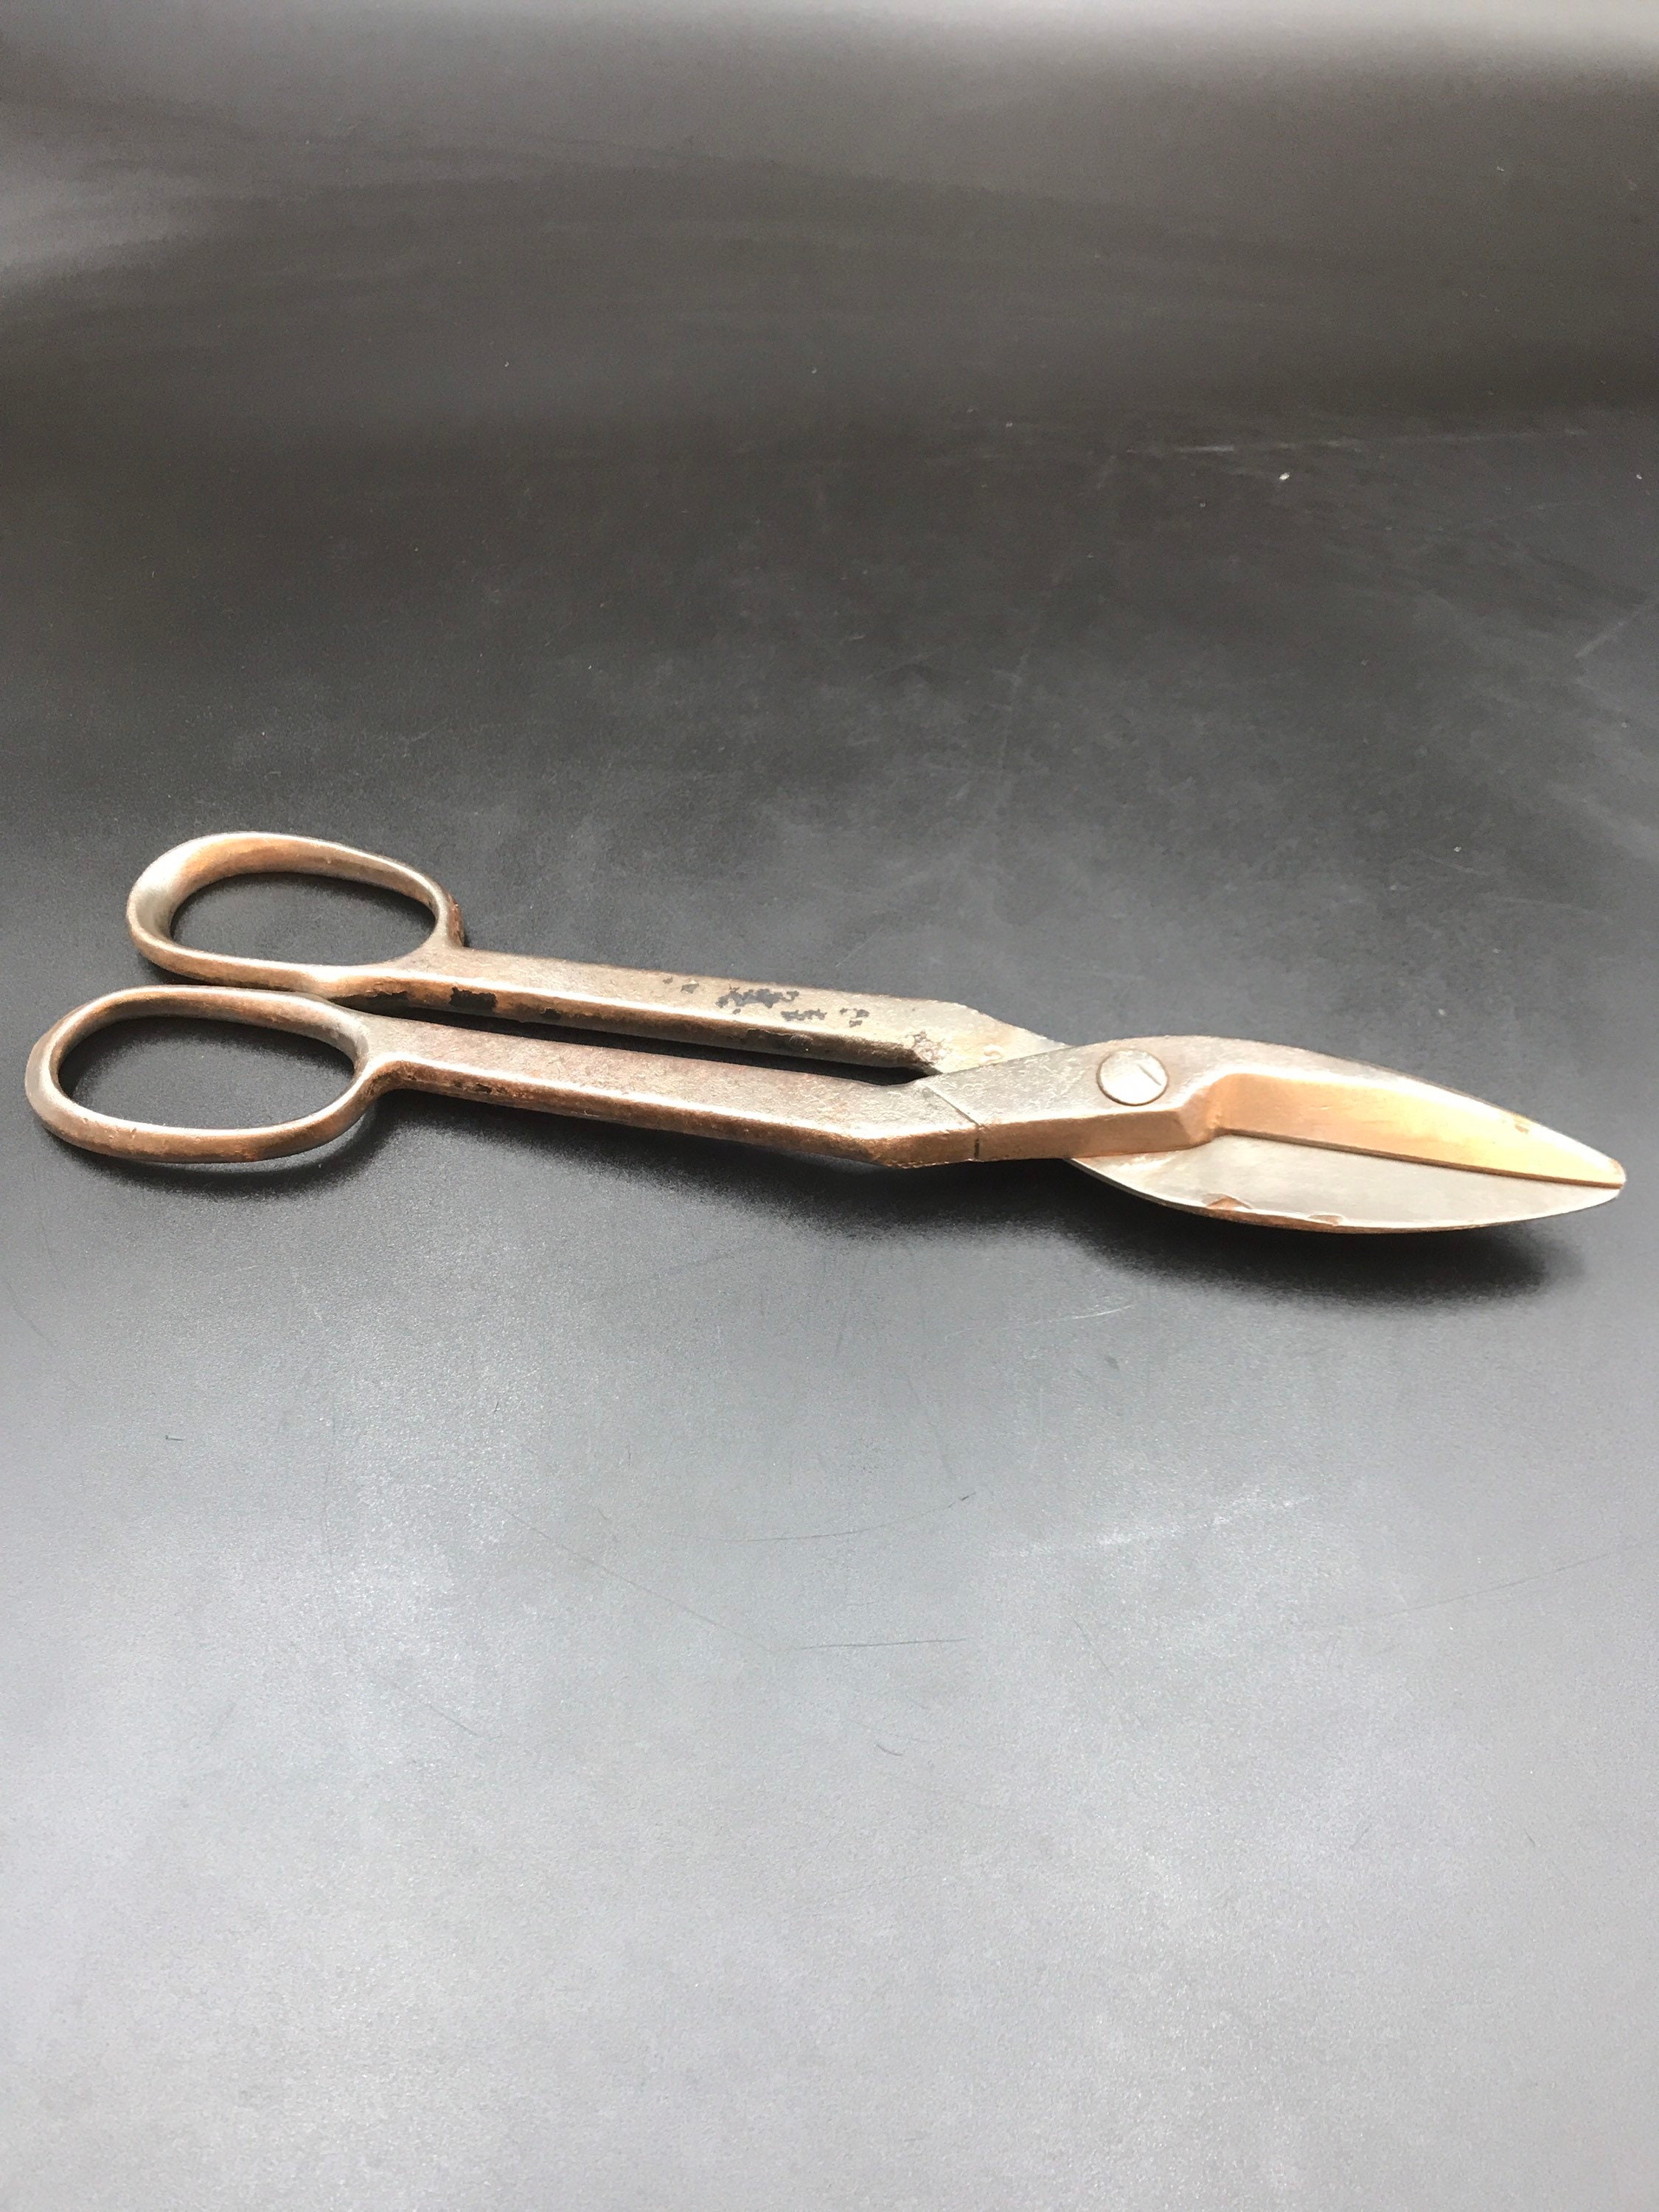 TIN SNIPS PAIR OF VINTAGE METAL SHEARS #9 WISS LARGE & SMALL